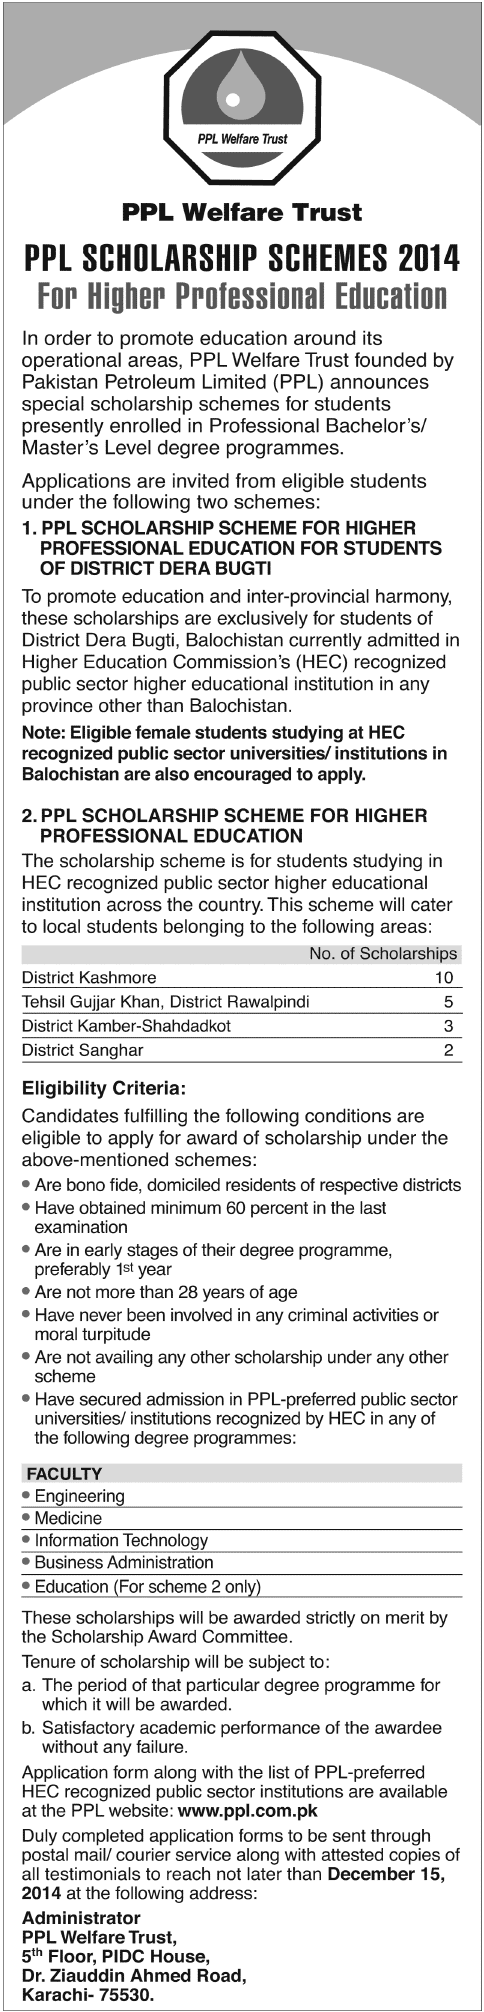 PPL Scholarship Schemes 2014 Higher Professional Education Application Form Download